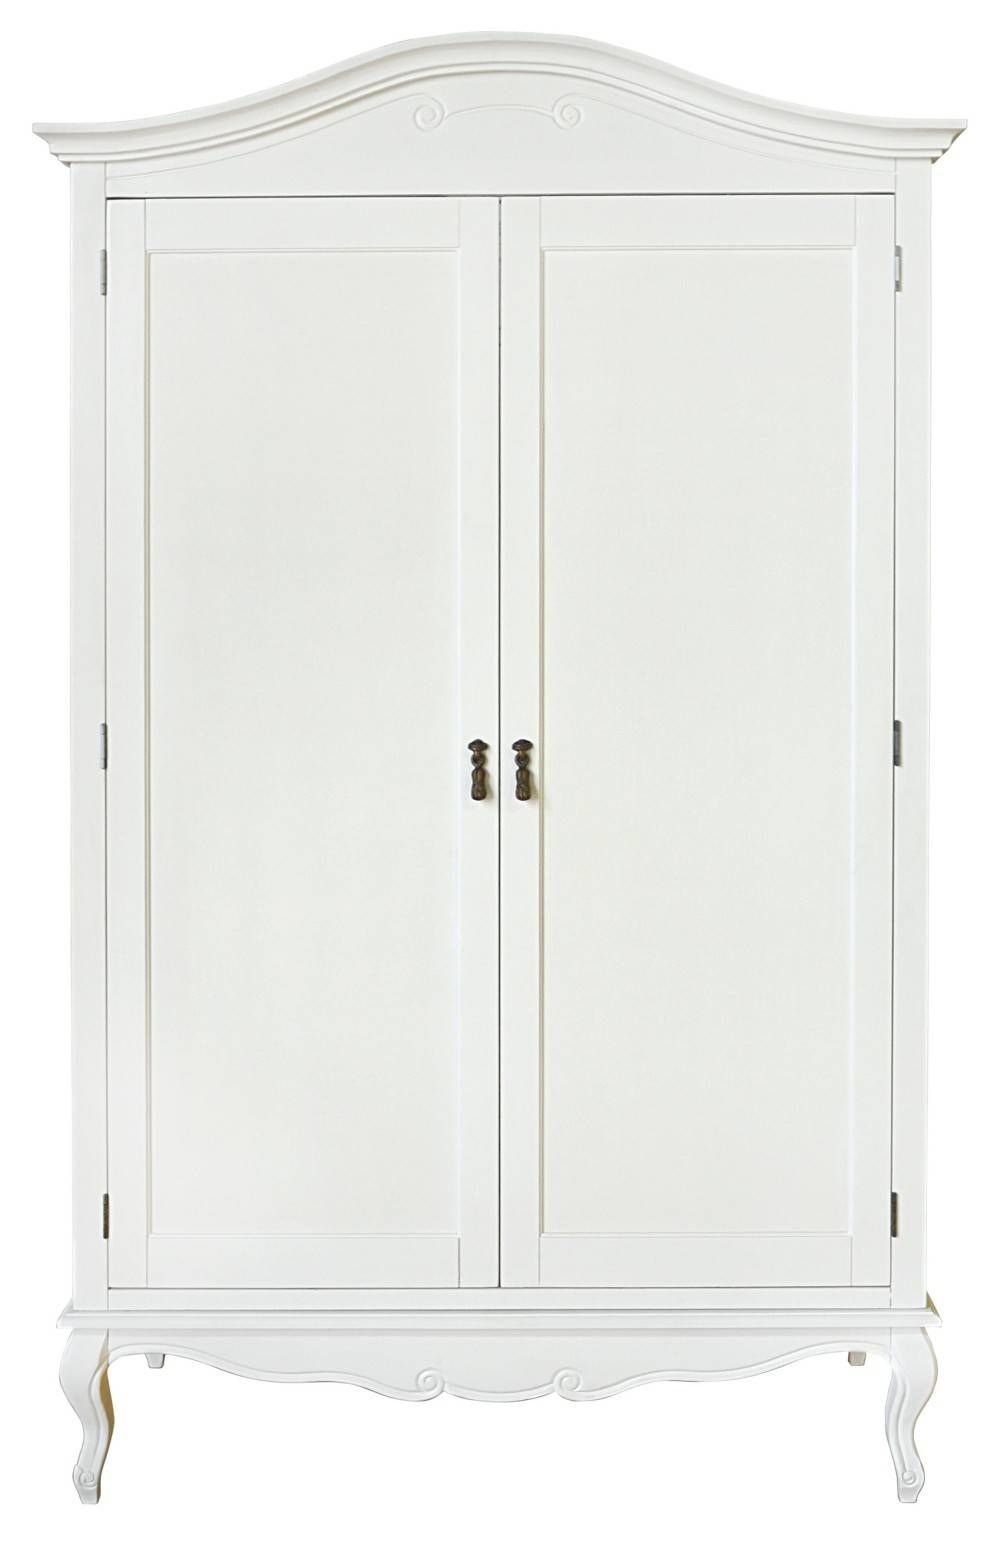 Wardrobes | Bedroom Furniture Direct Throughout Wardrobe Double Hanging Rail (View 13 of 30)